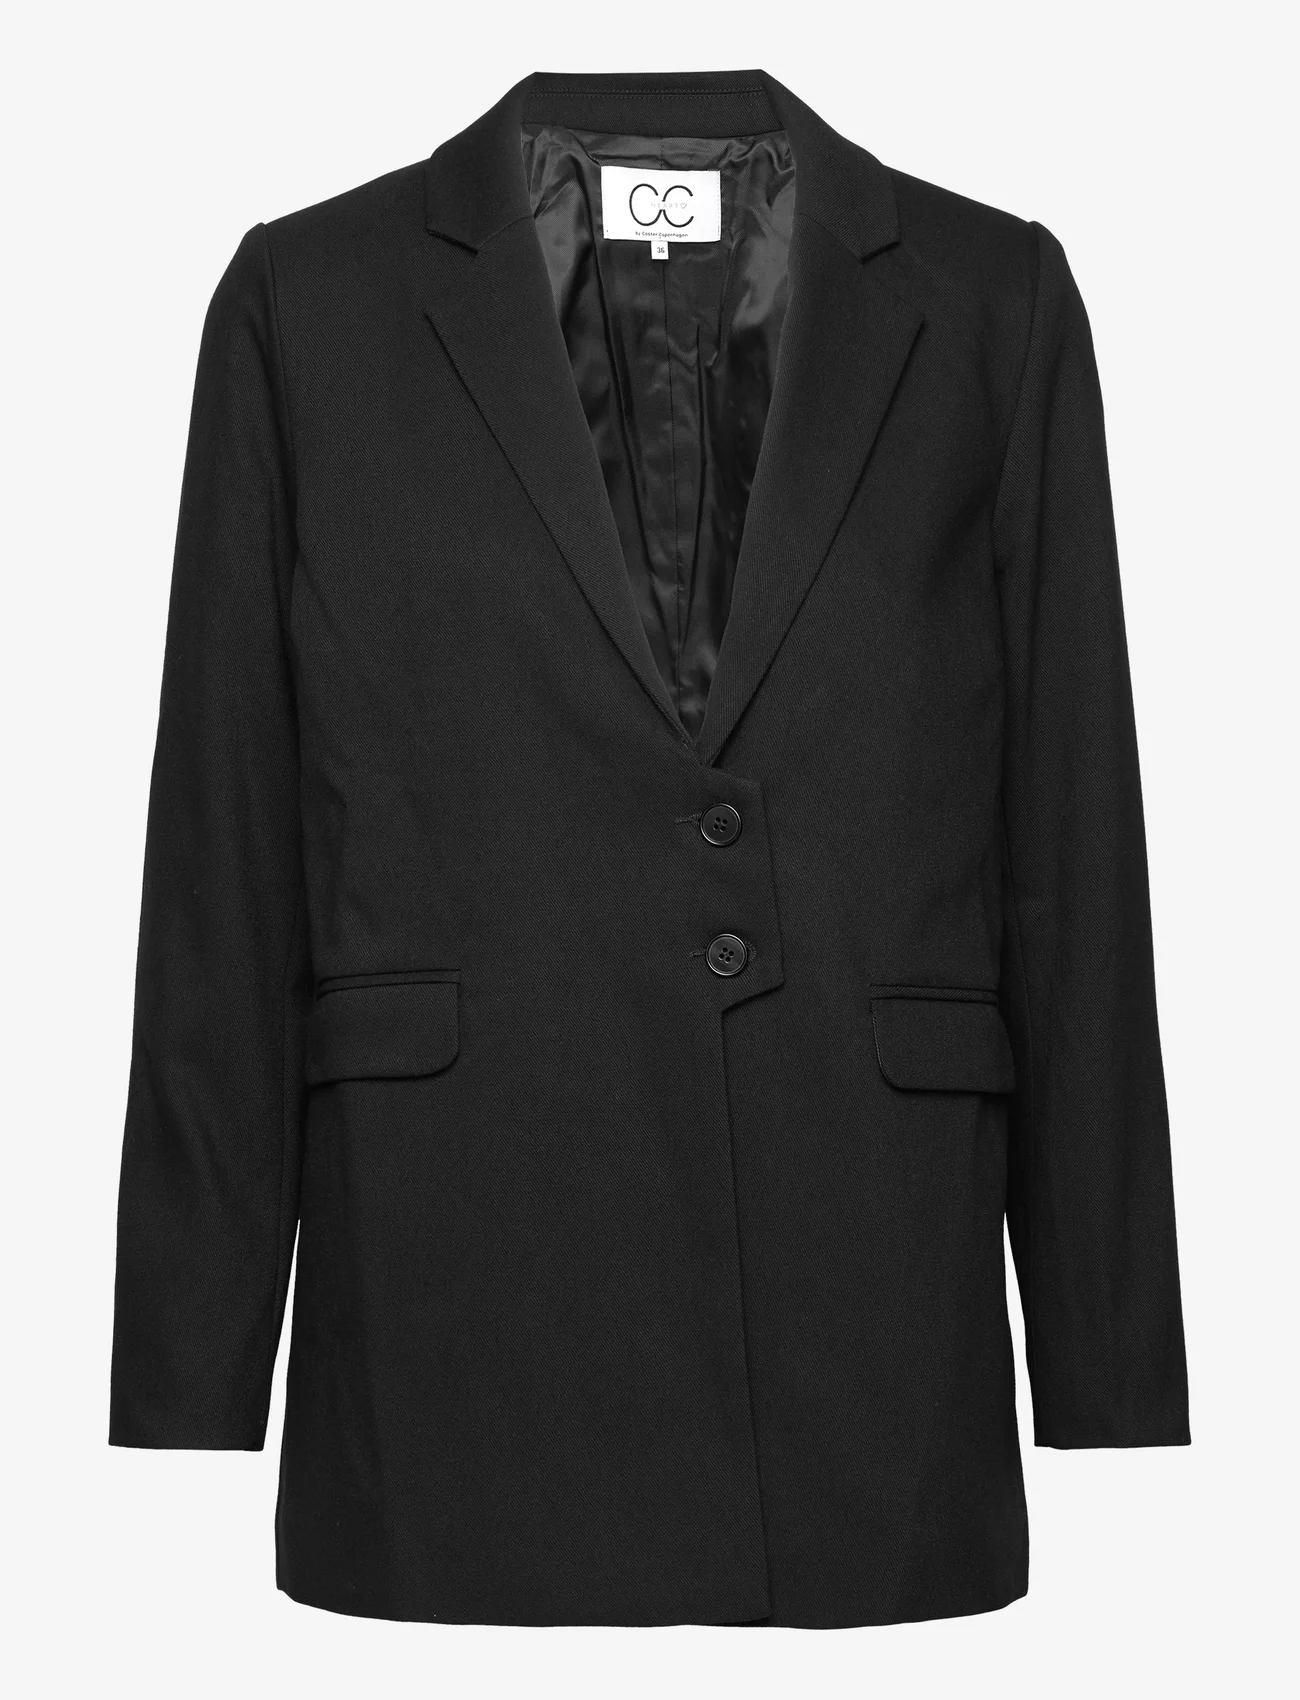 Coster Copenhagen - CC Heart KARLA twill blazer - party wear at outlet prices - black - 0